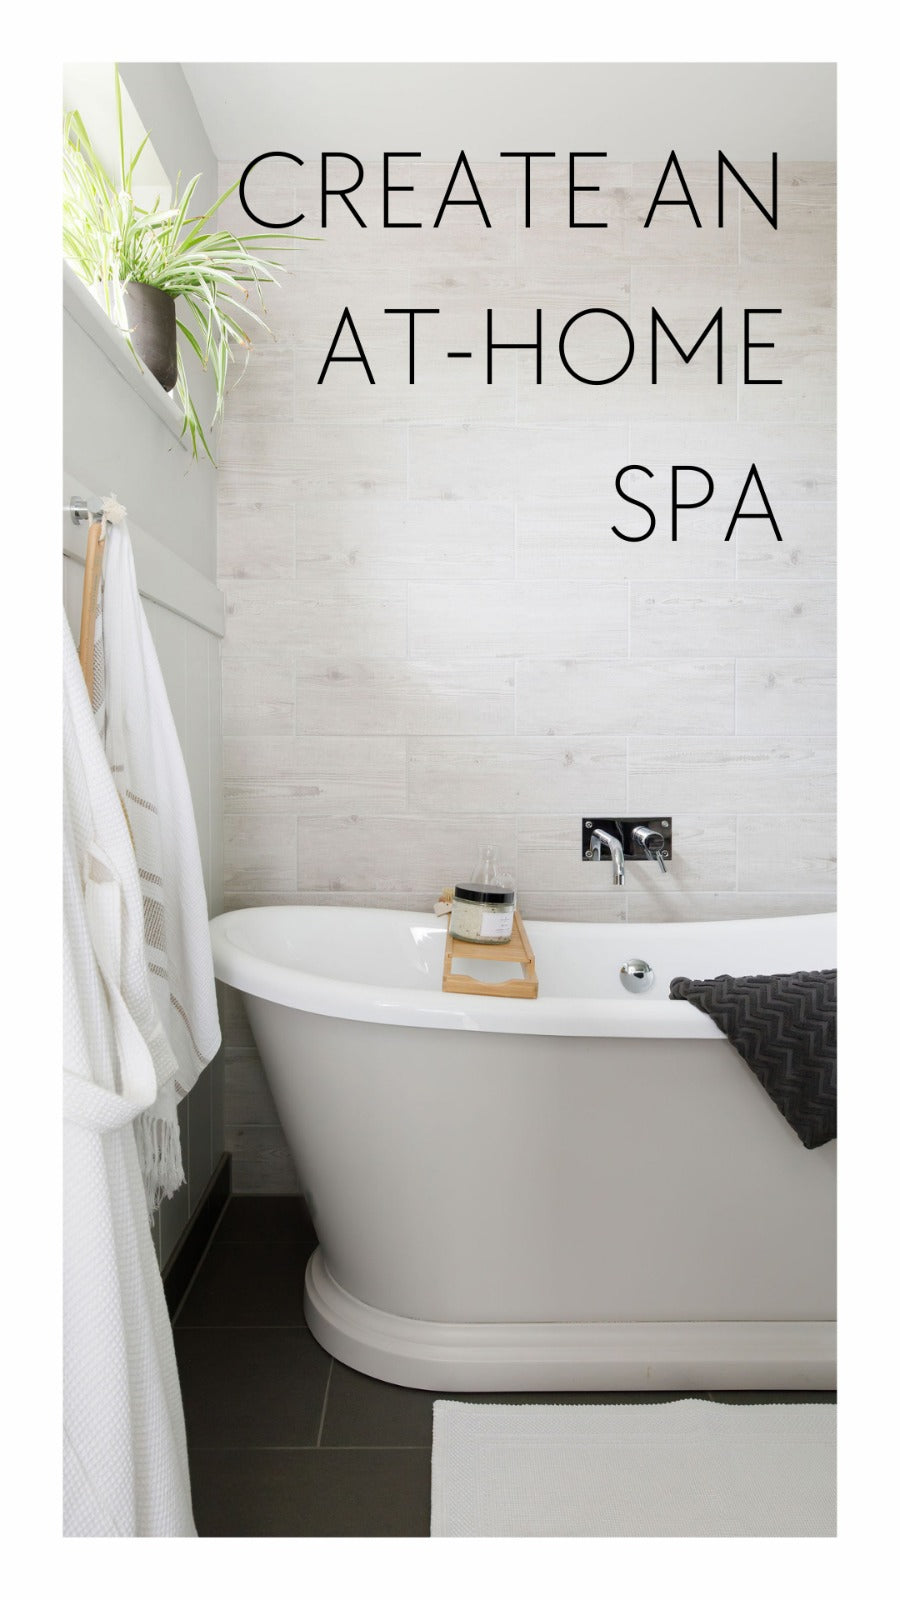 How to create an at-home spa